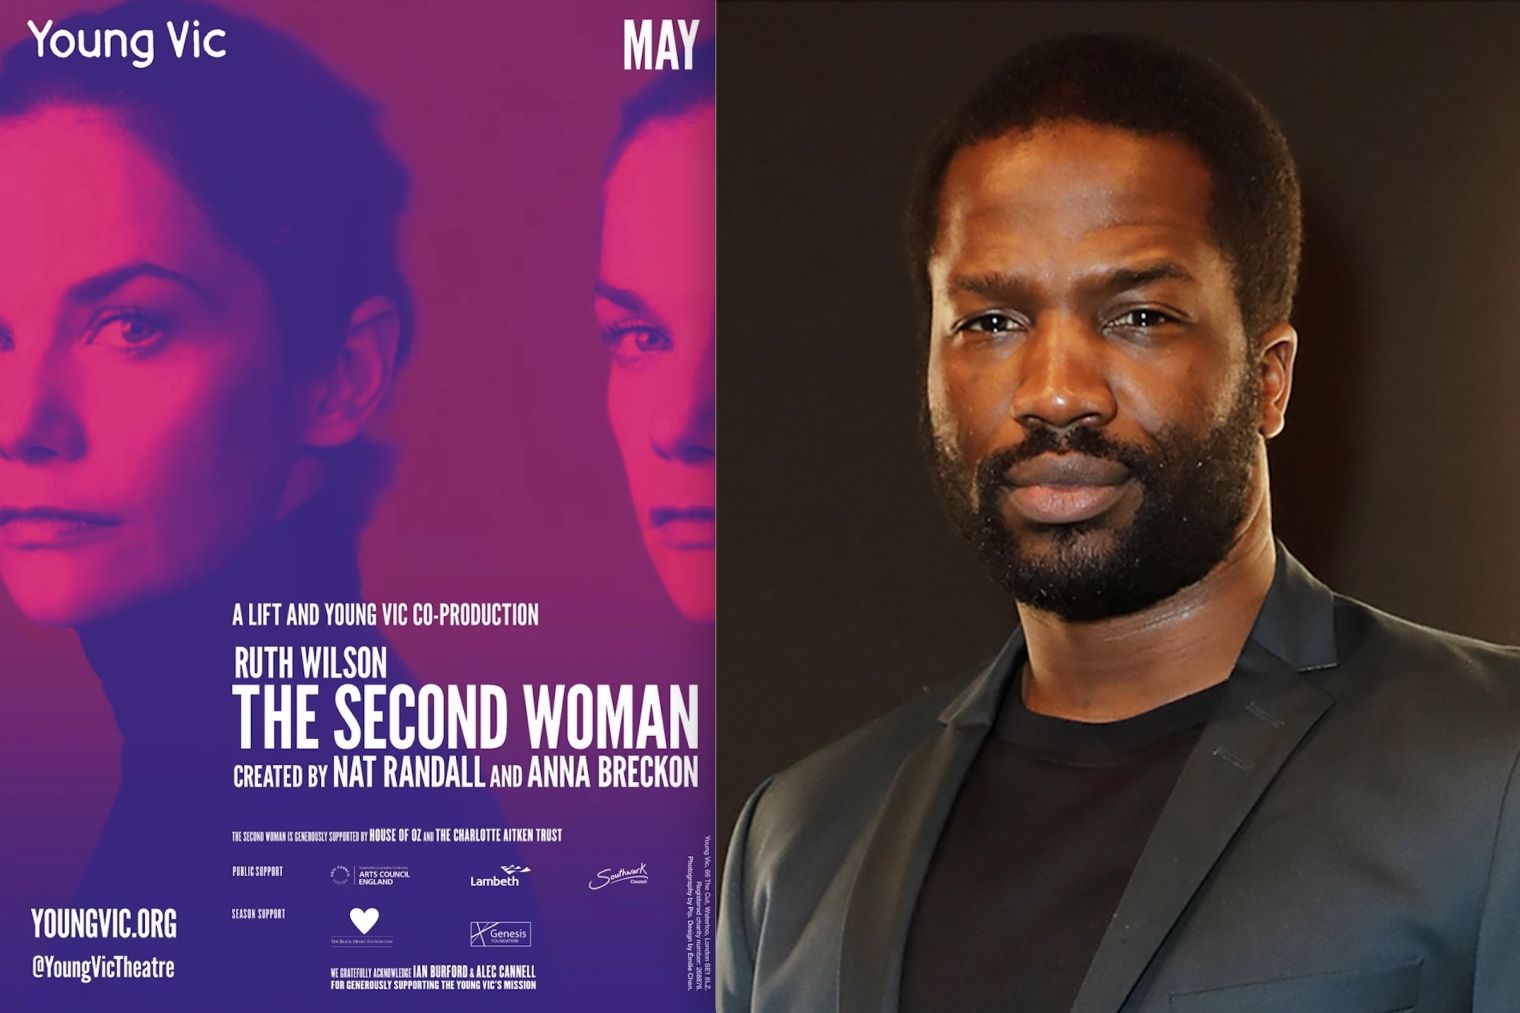 Sọpẹ́ Dìrísù was one of 100 men to appear alongside Ruth Wilson in her ‘astonishing' 24 hour play ‘The Second Woman’